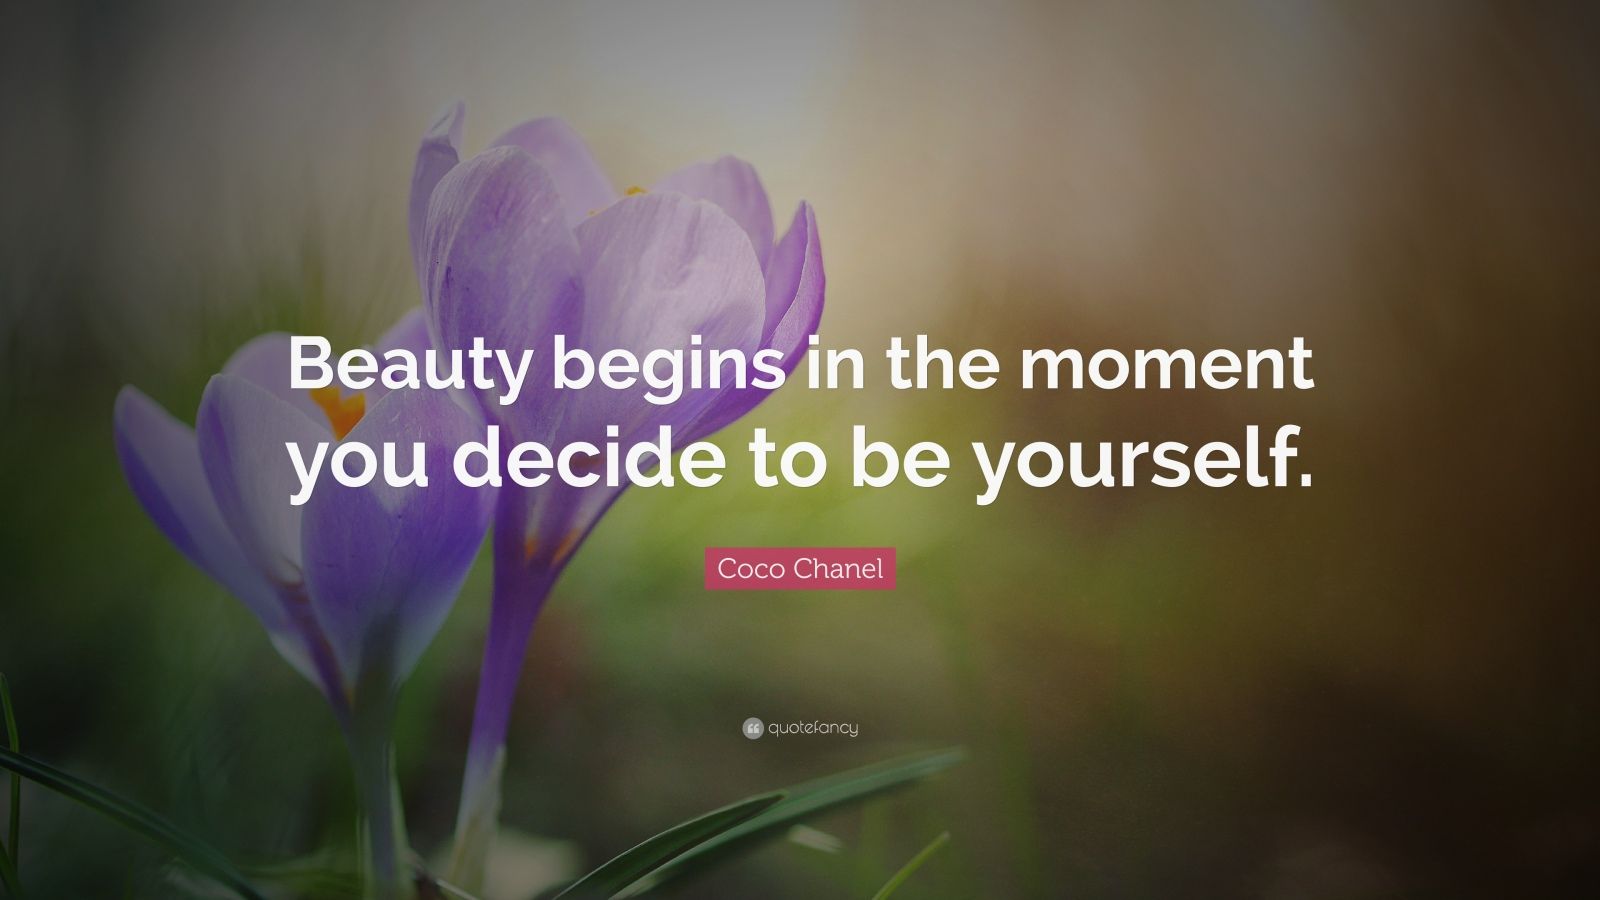 Coco Chanel Quote: “Beauty begins in the moment you decide to be ...